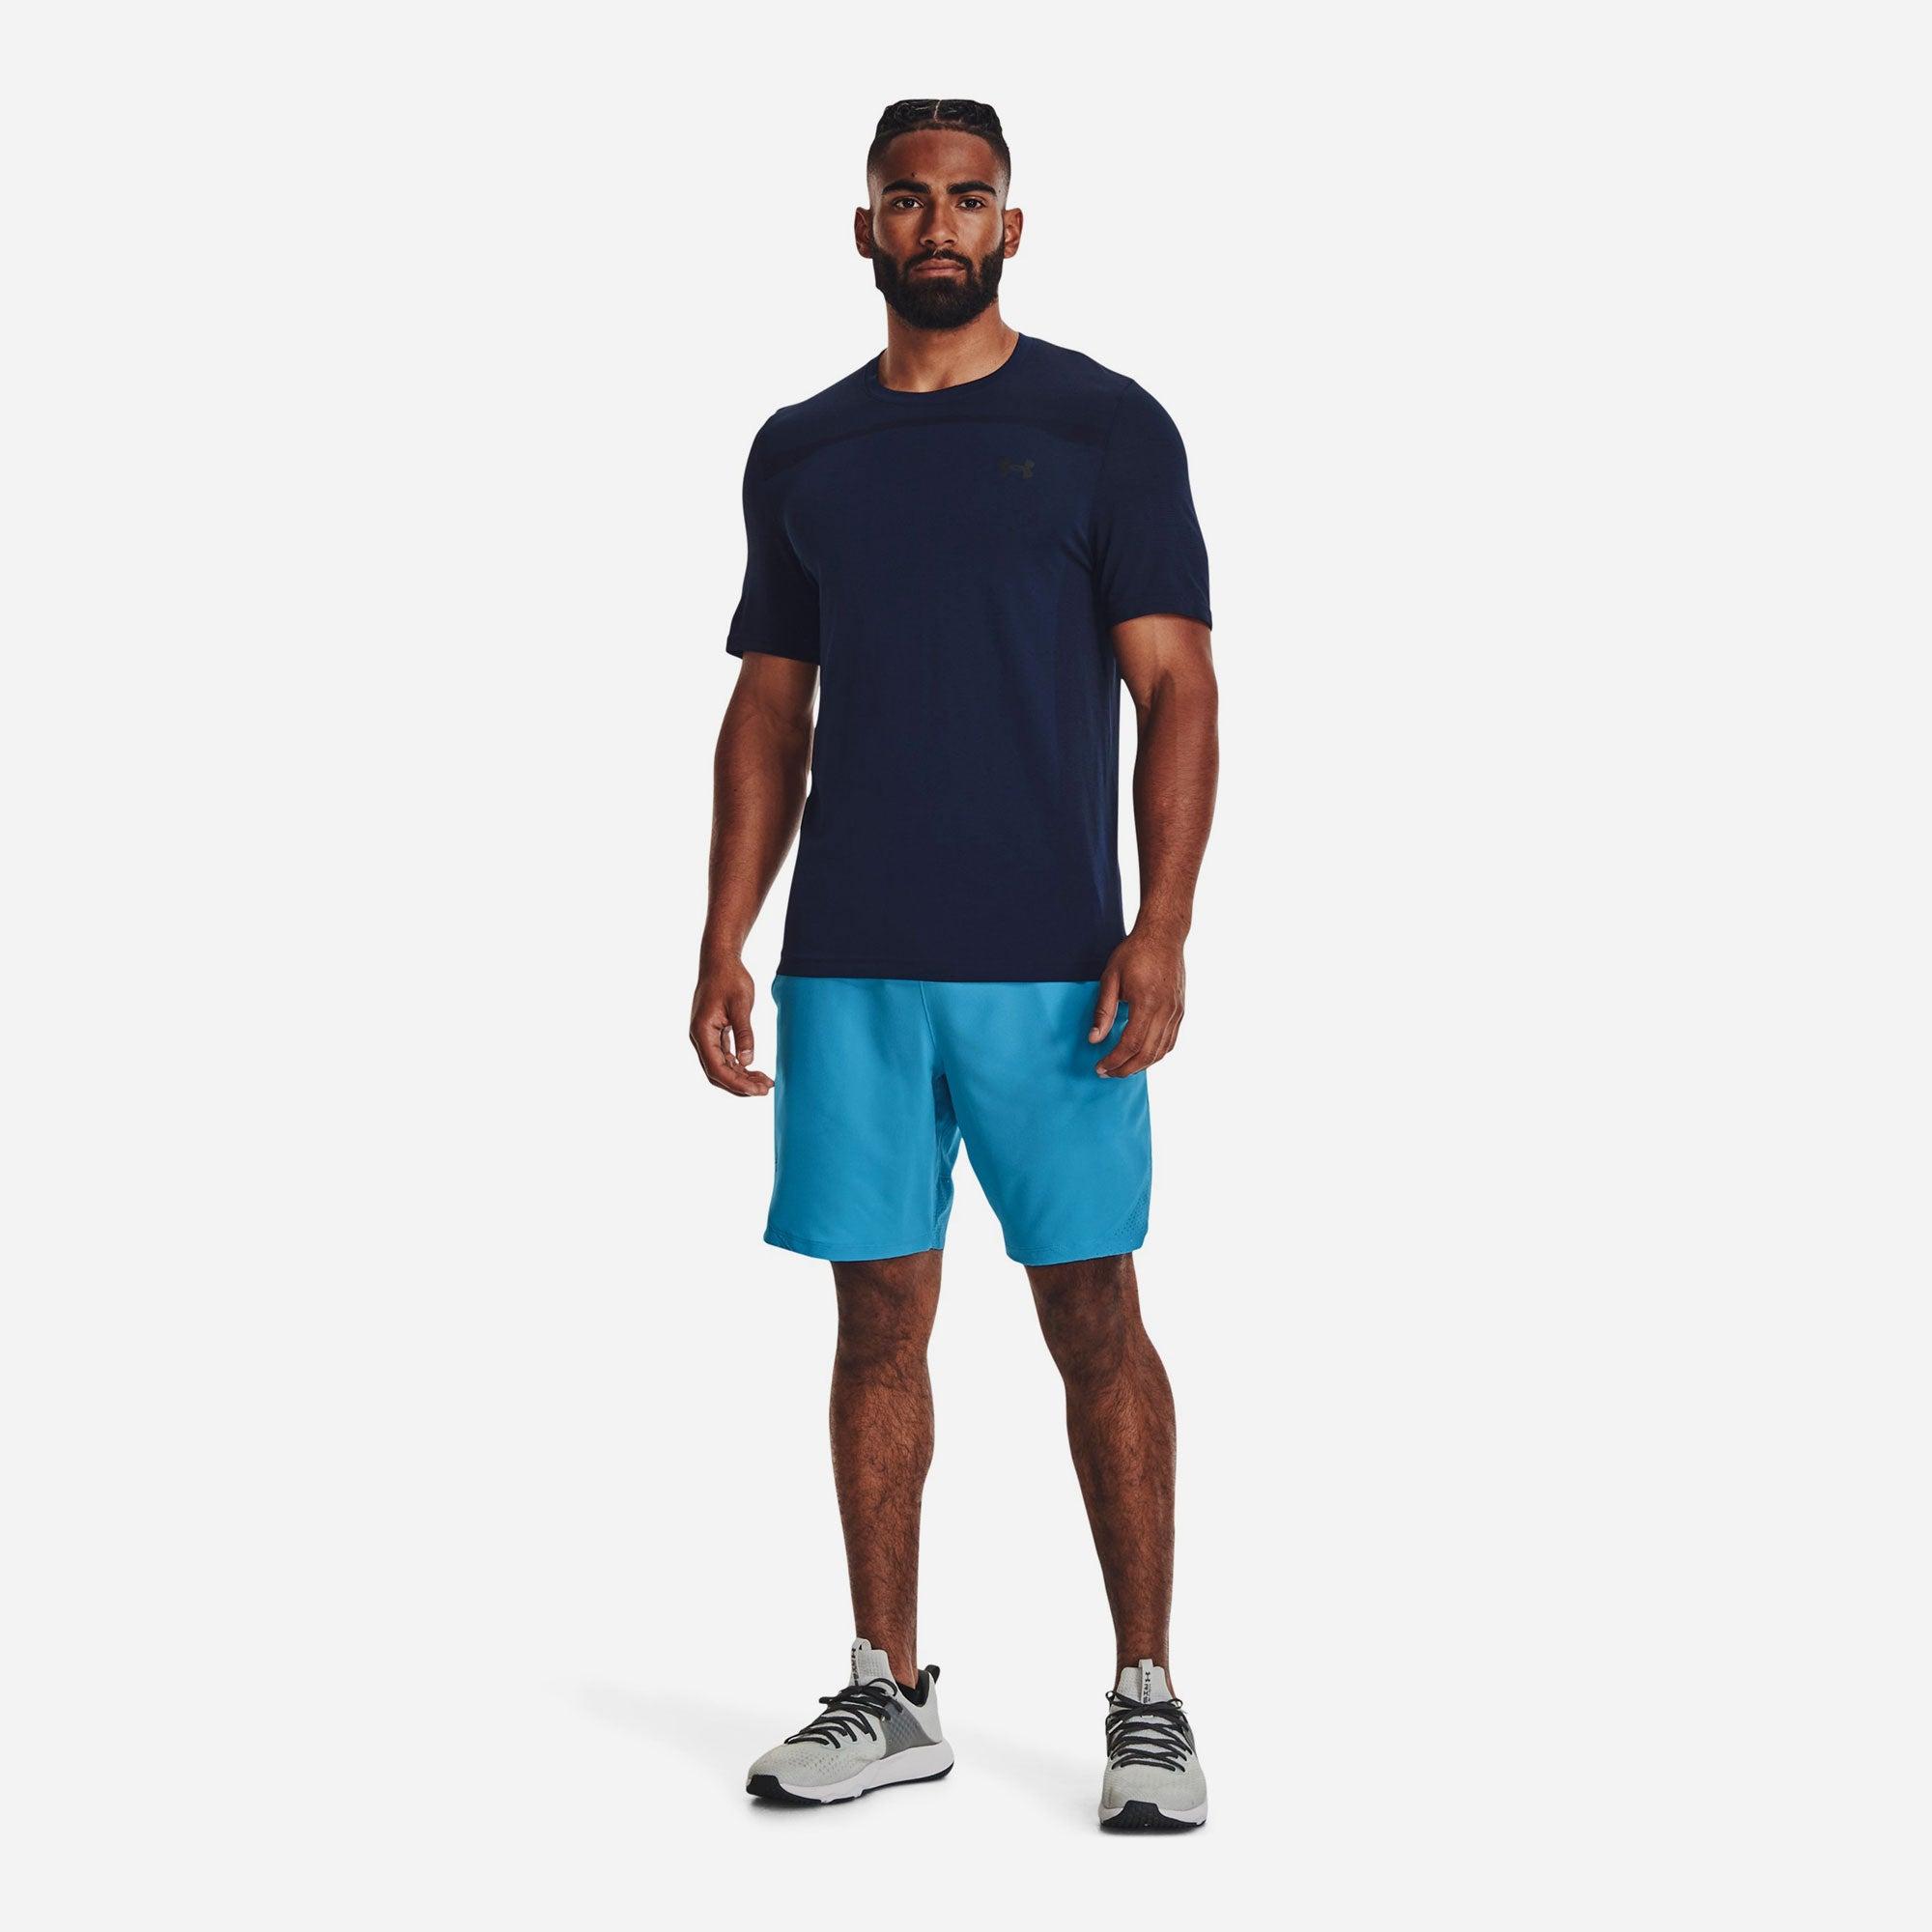 Quần ngắn thể thao nam Under Armour Vanish Woven 8In - 1370382-419